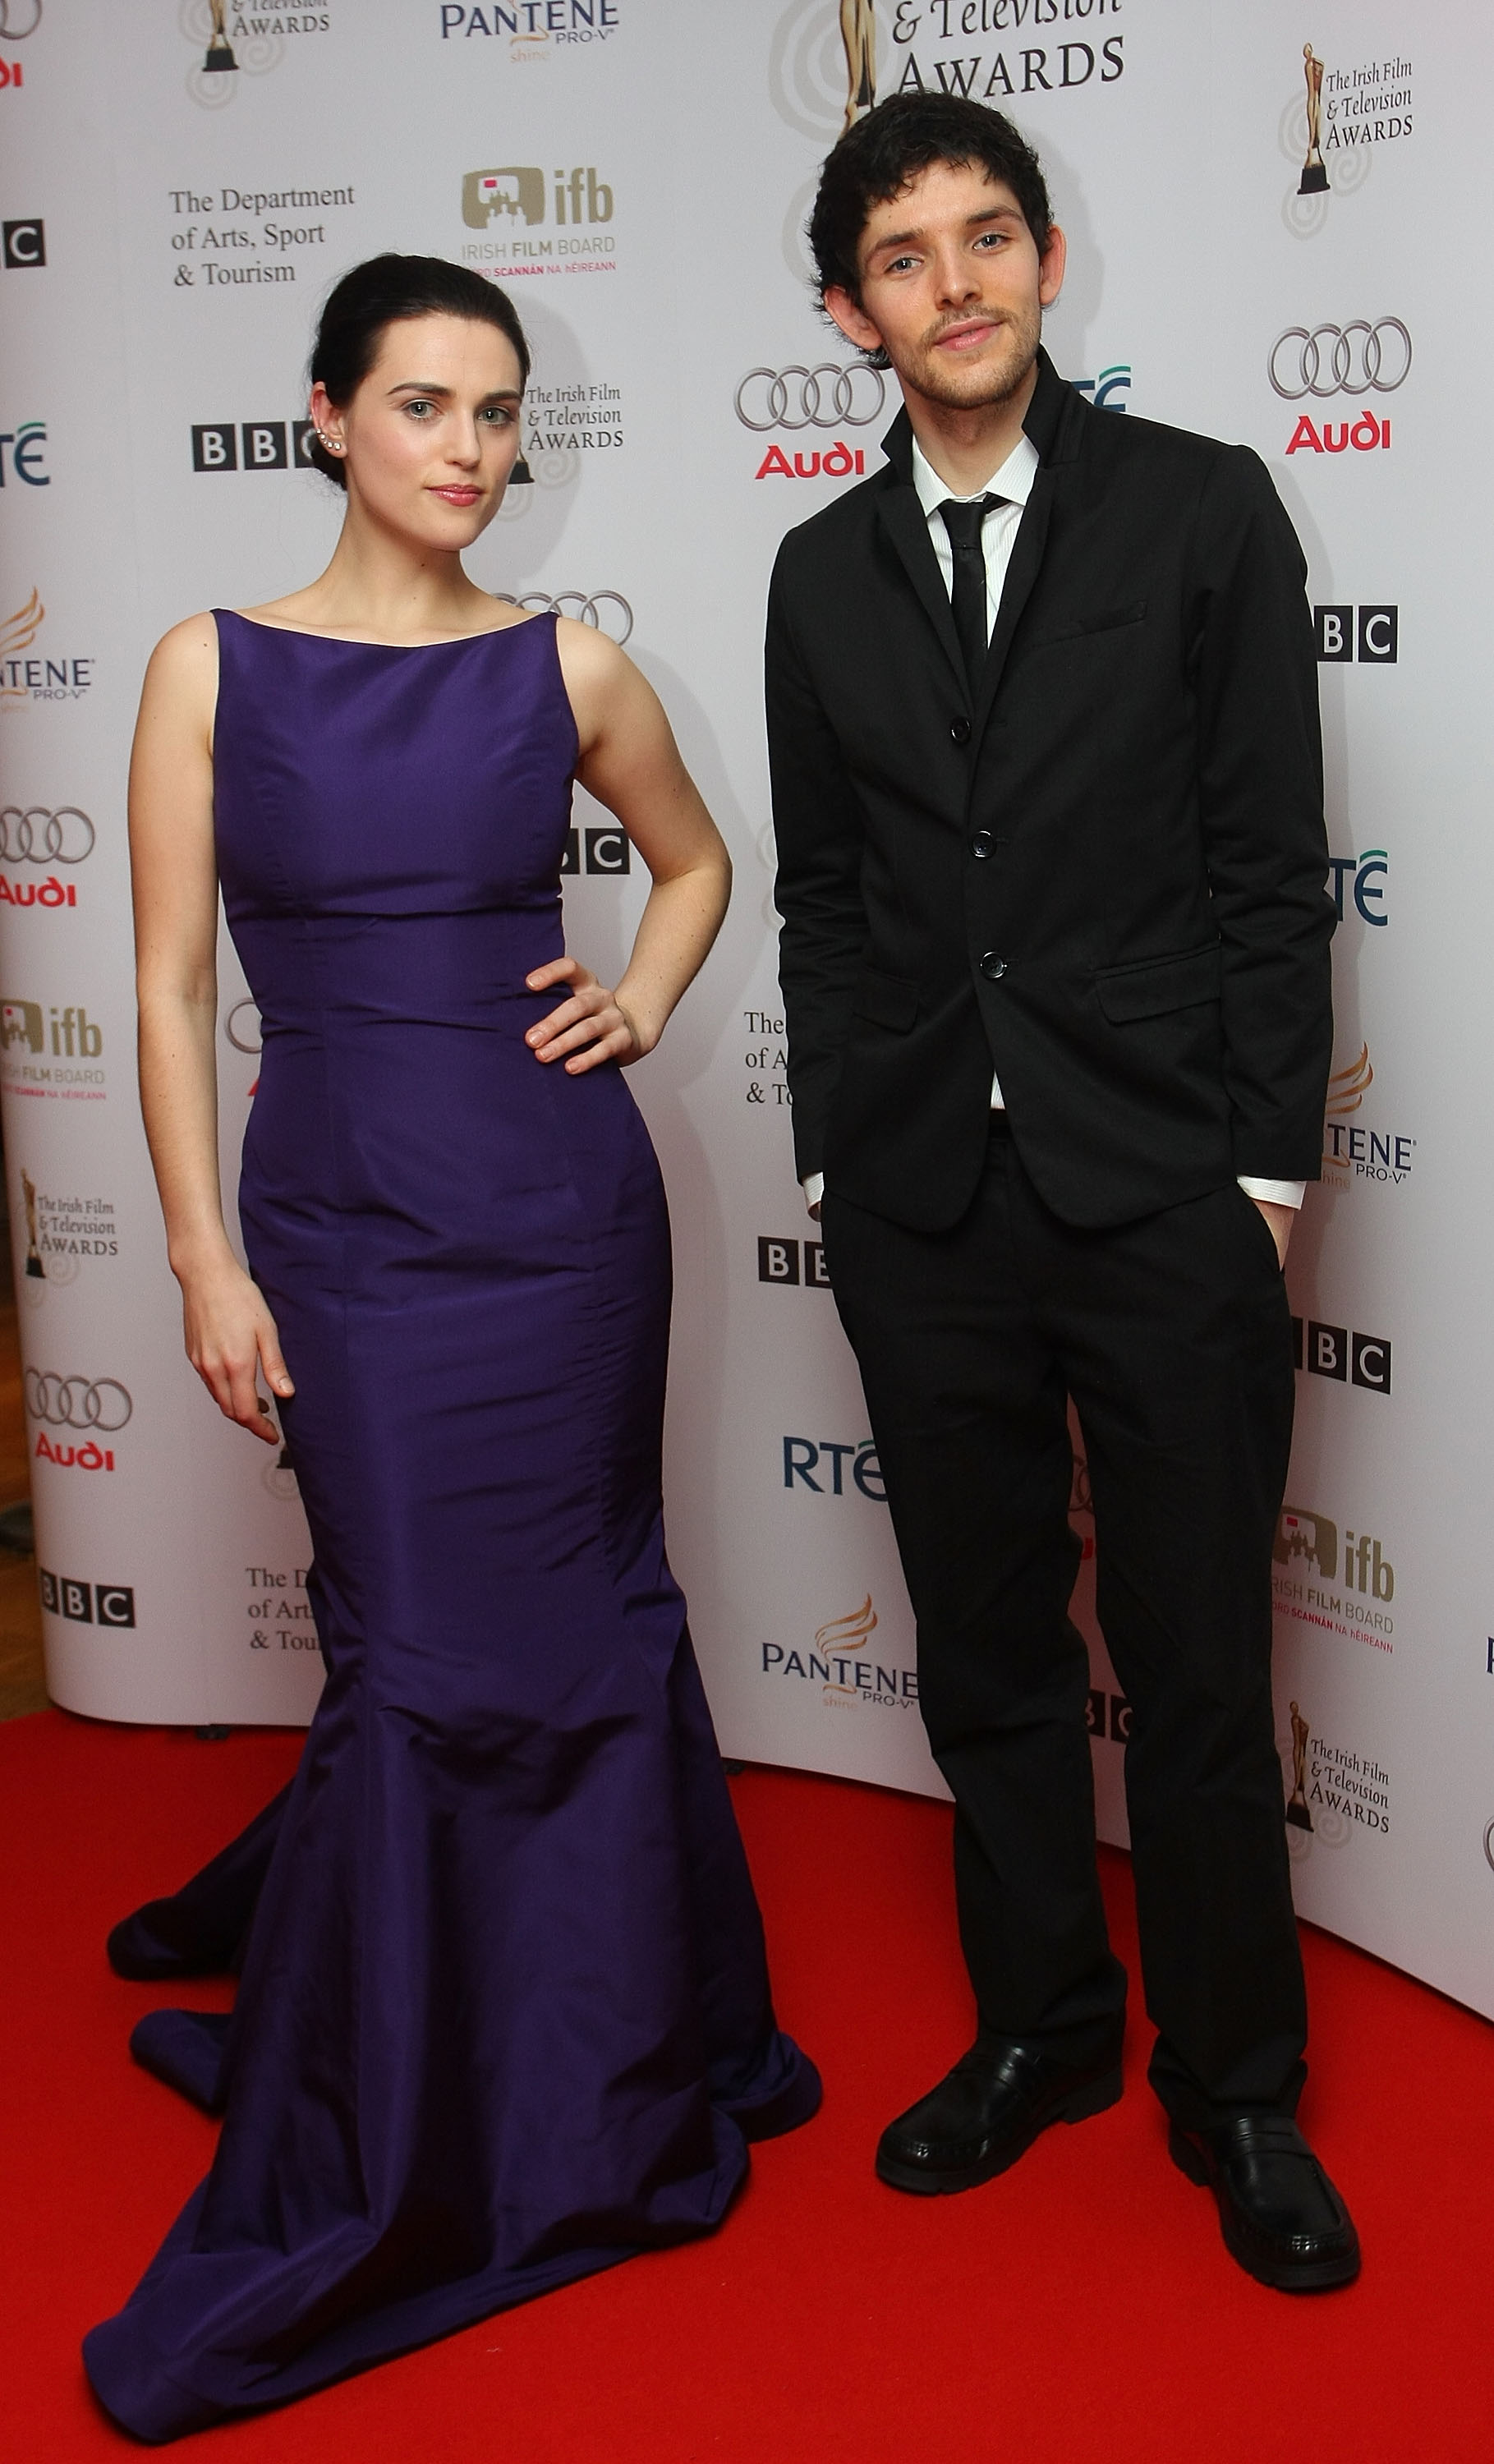 Katie McGrath and Colin Morgan appear in the press room for the Irish Film & TV Awards at the Burlington Hotel on February 14, 2009, in Dublin, Ireland. | Source: Getty Images